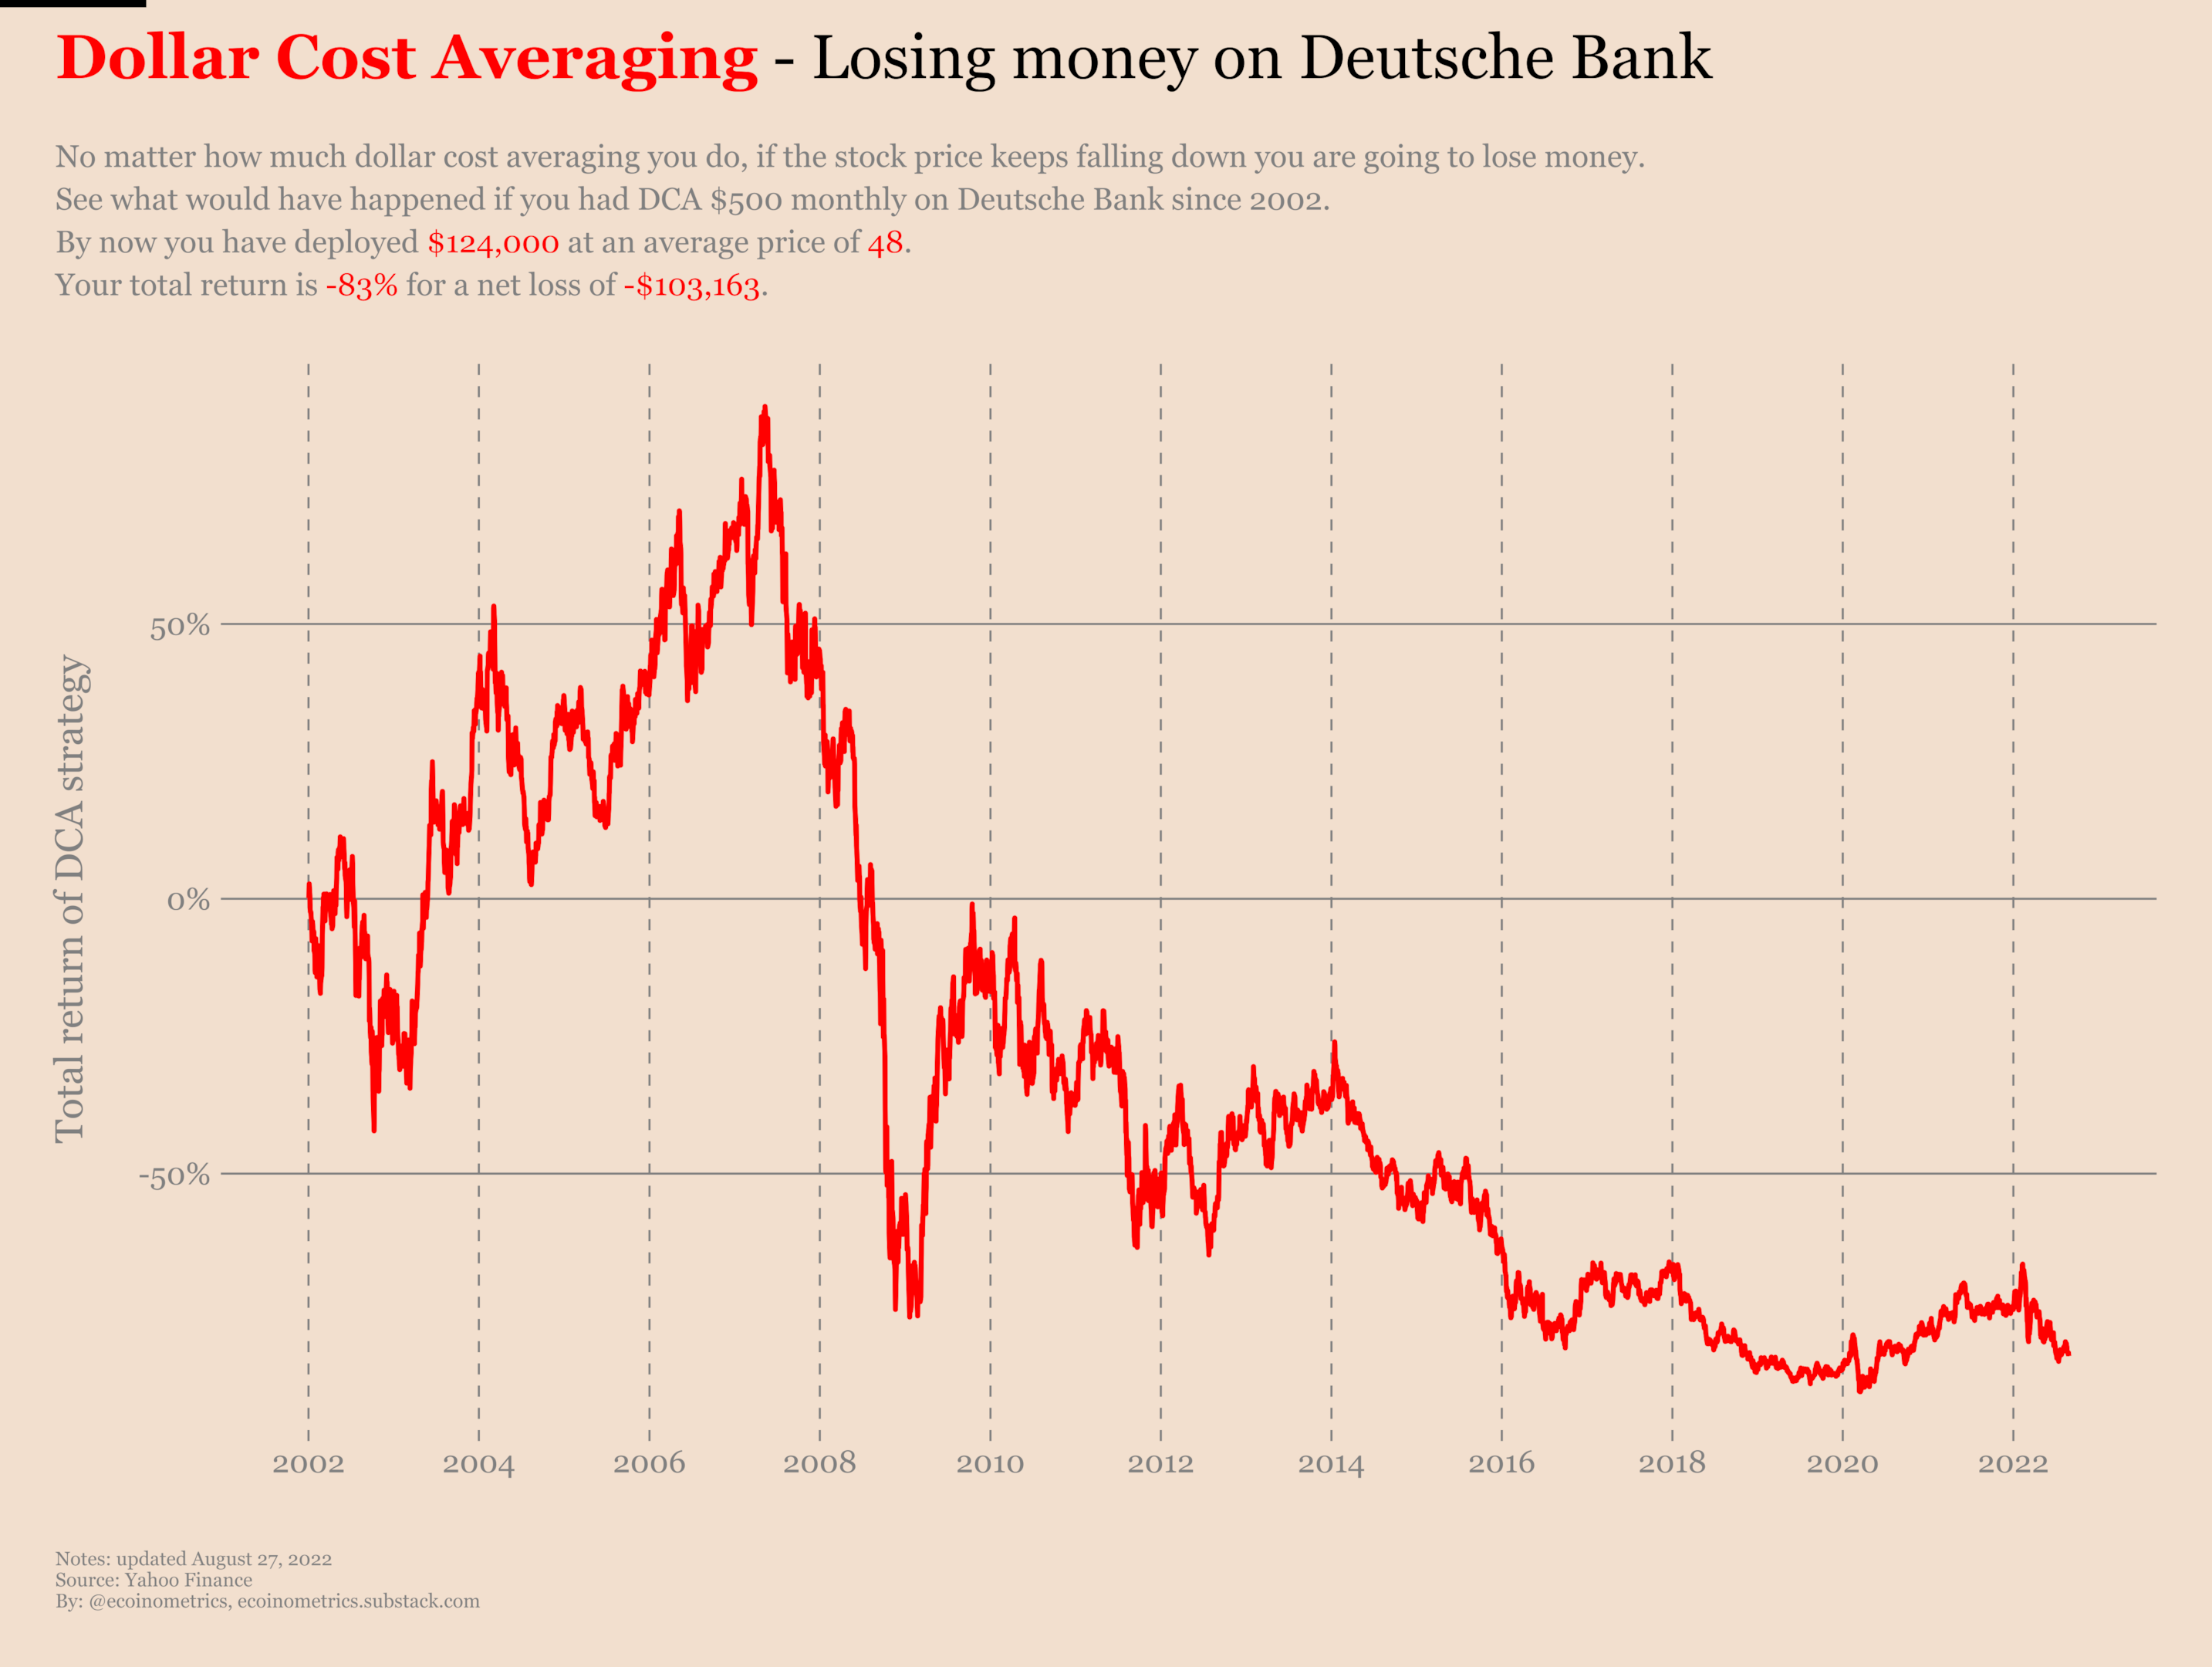 Dollar cost averaging the Deutsche Bank for 20 years would have only brought pain to you.